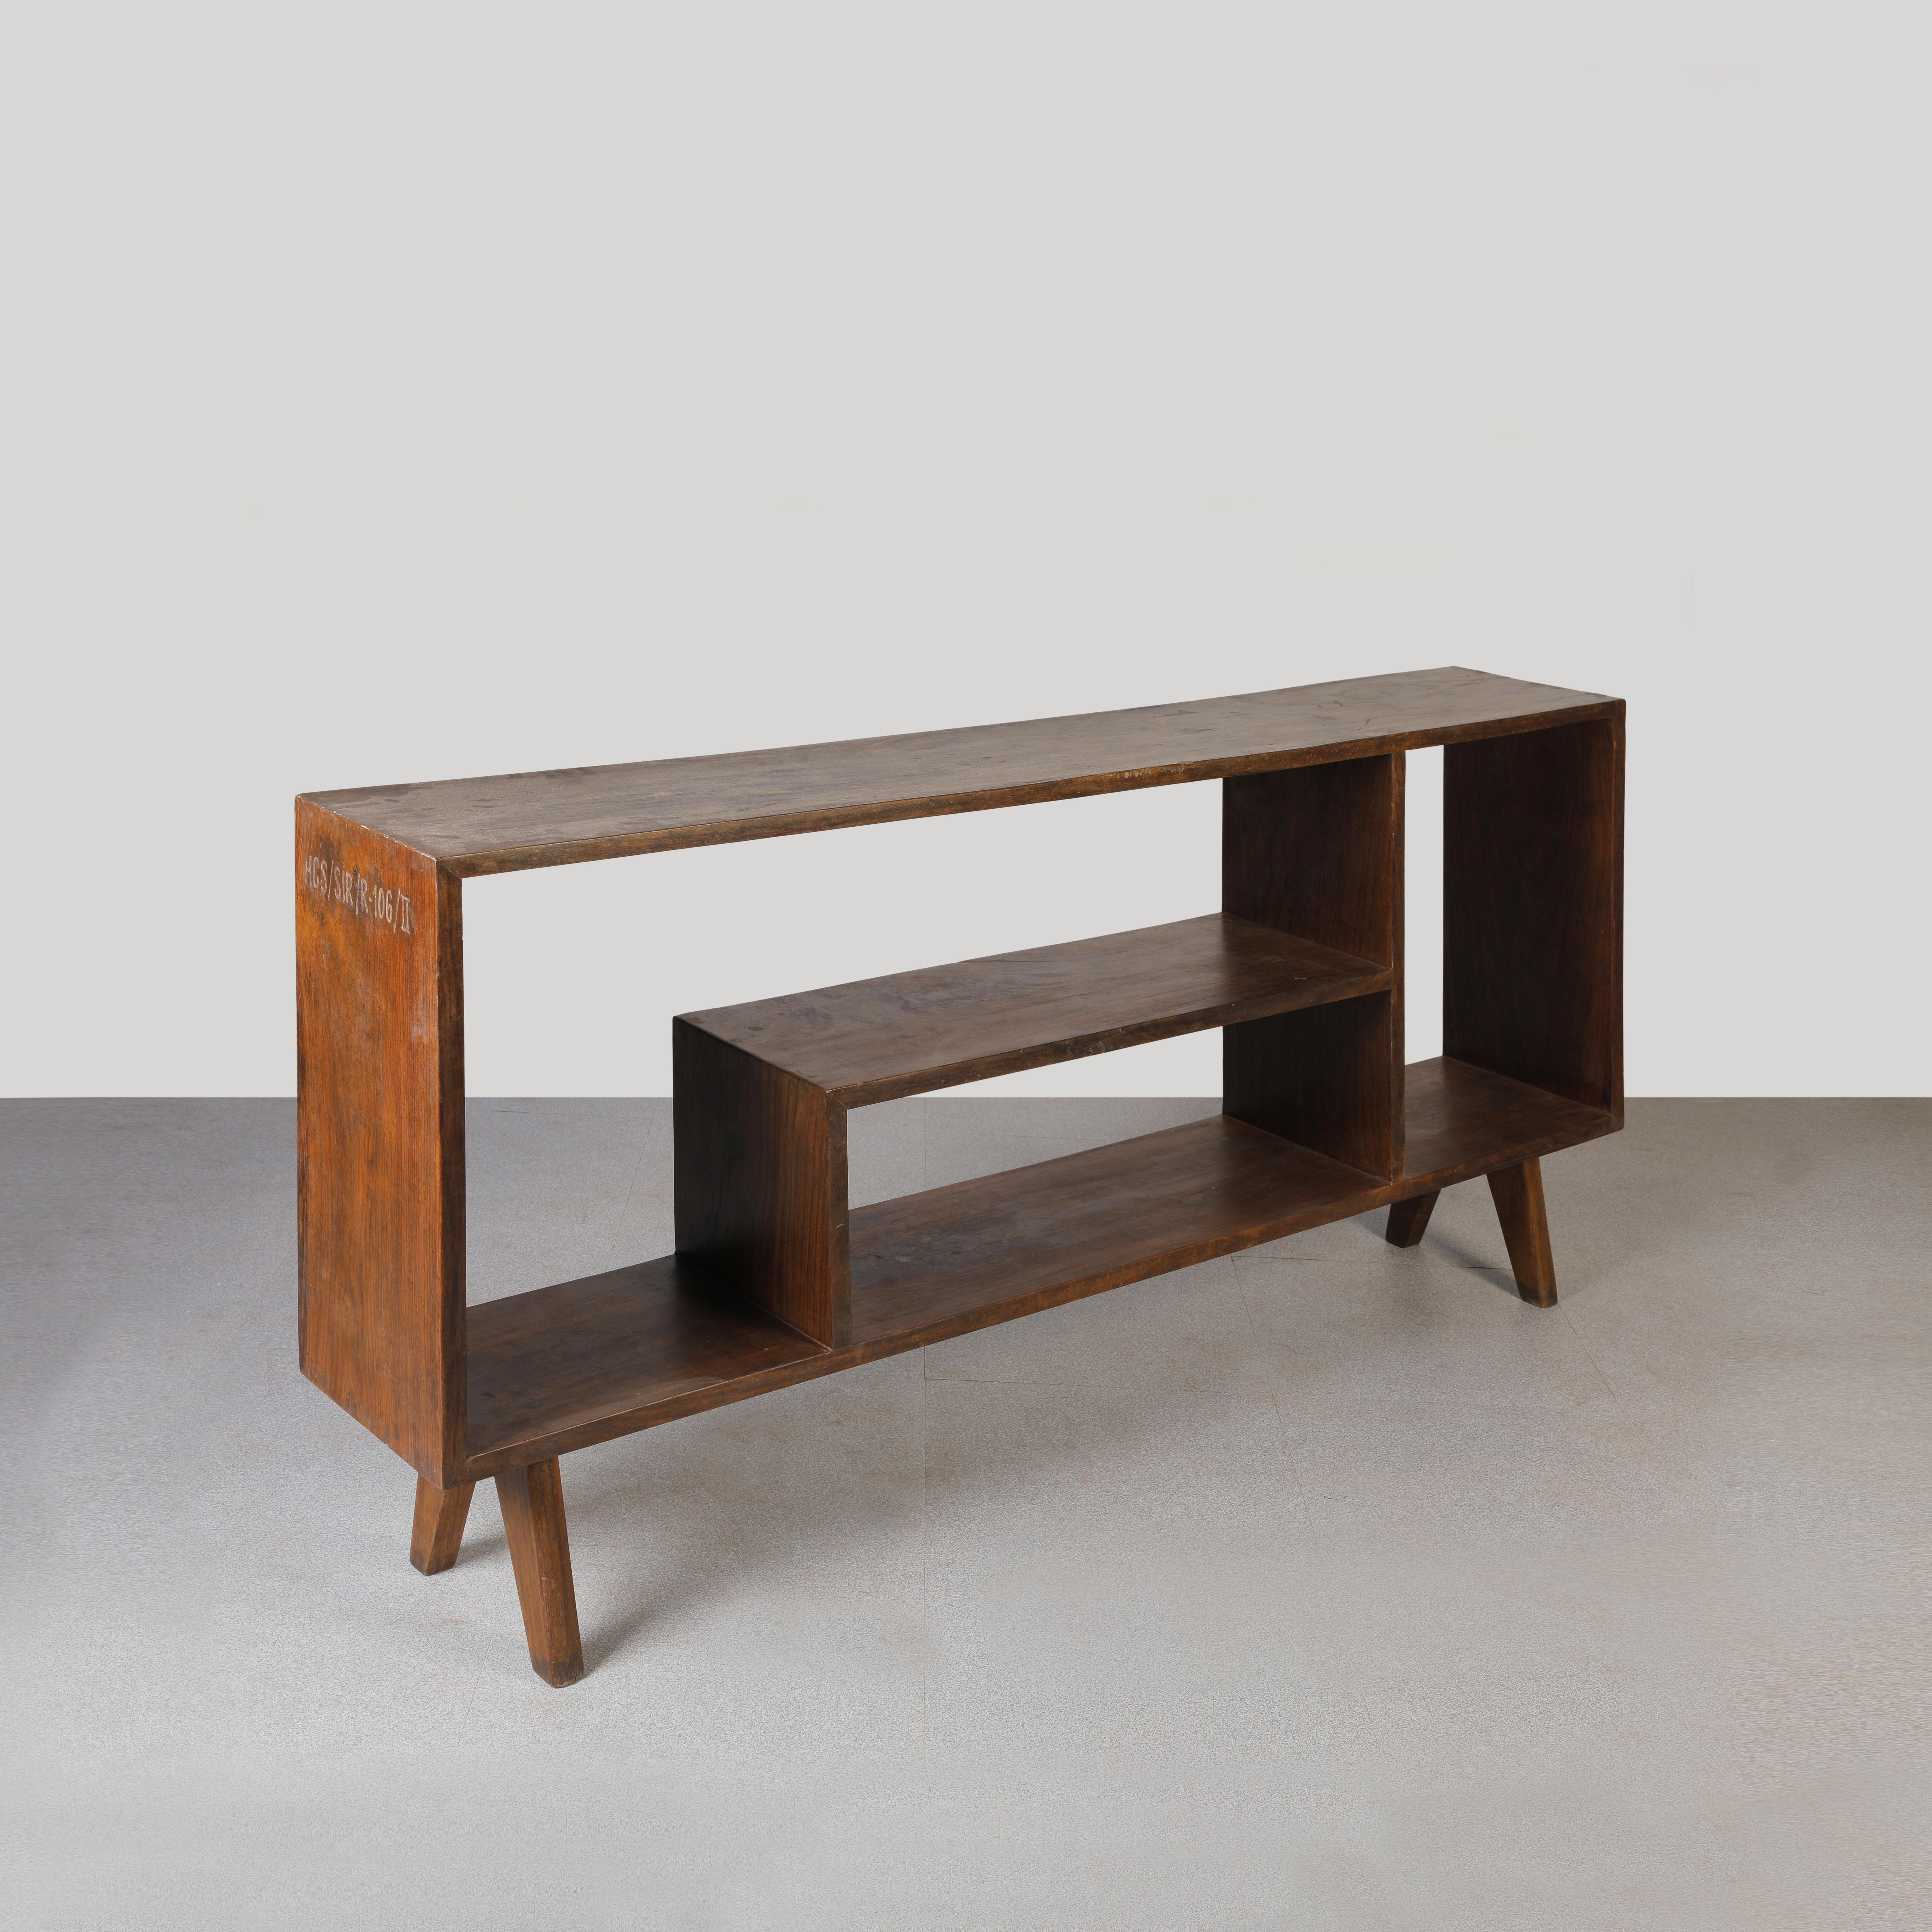 Indian Pierre Jeanneret PJ-R-16-A File Rack / Authentic Mid-Century Modern Chandigarh For Sale